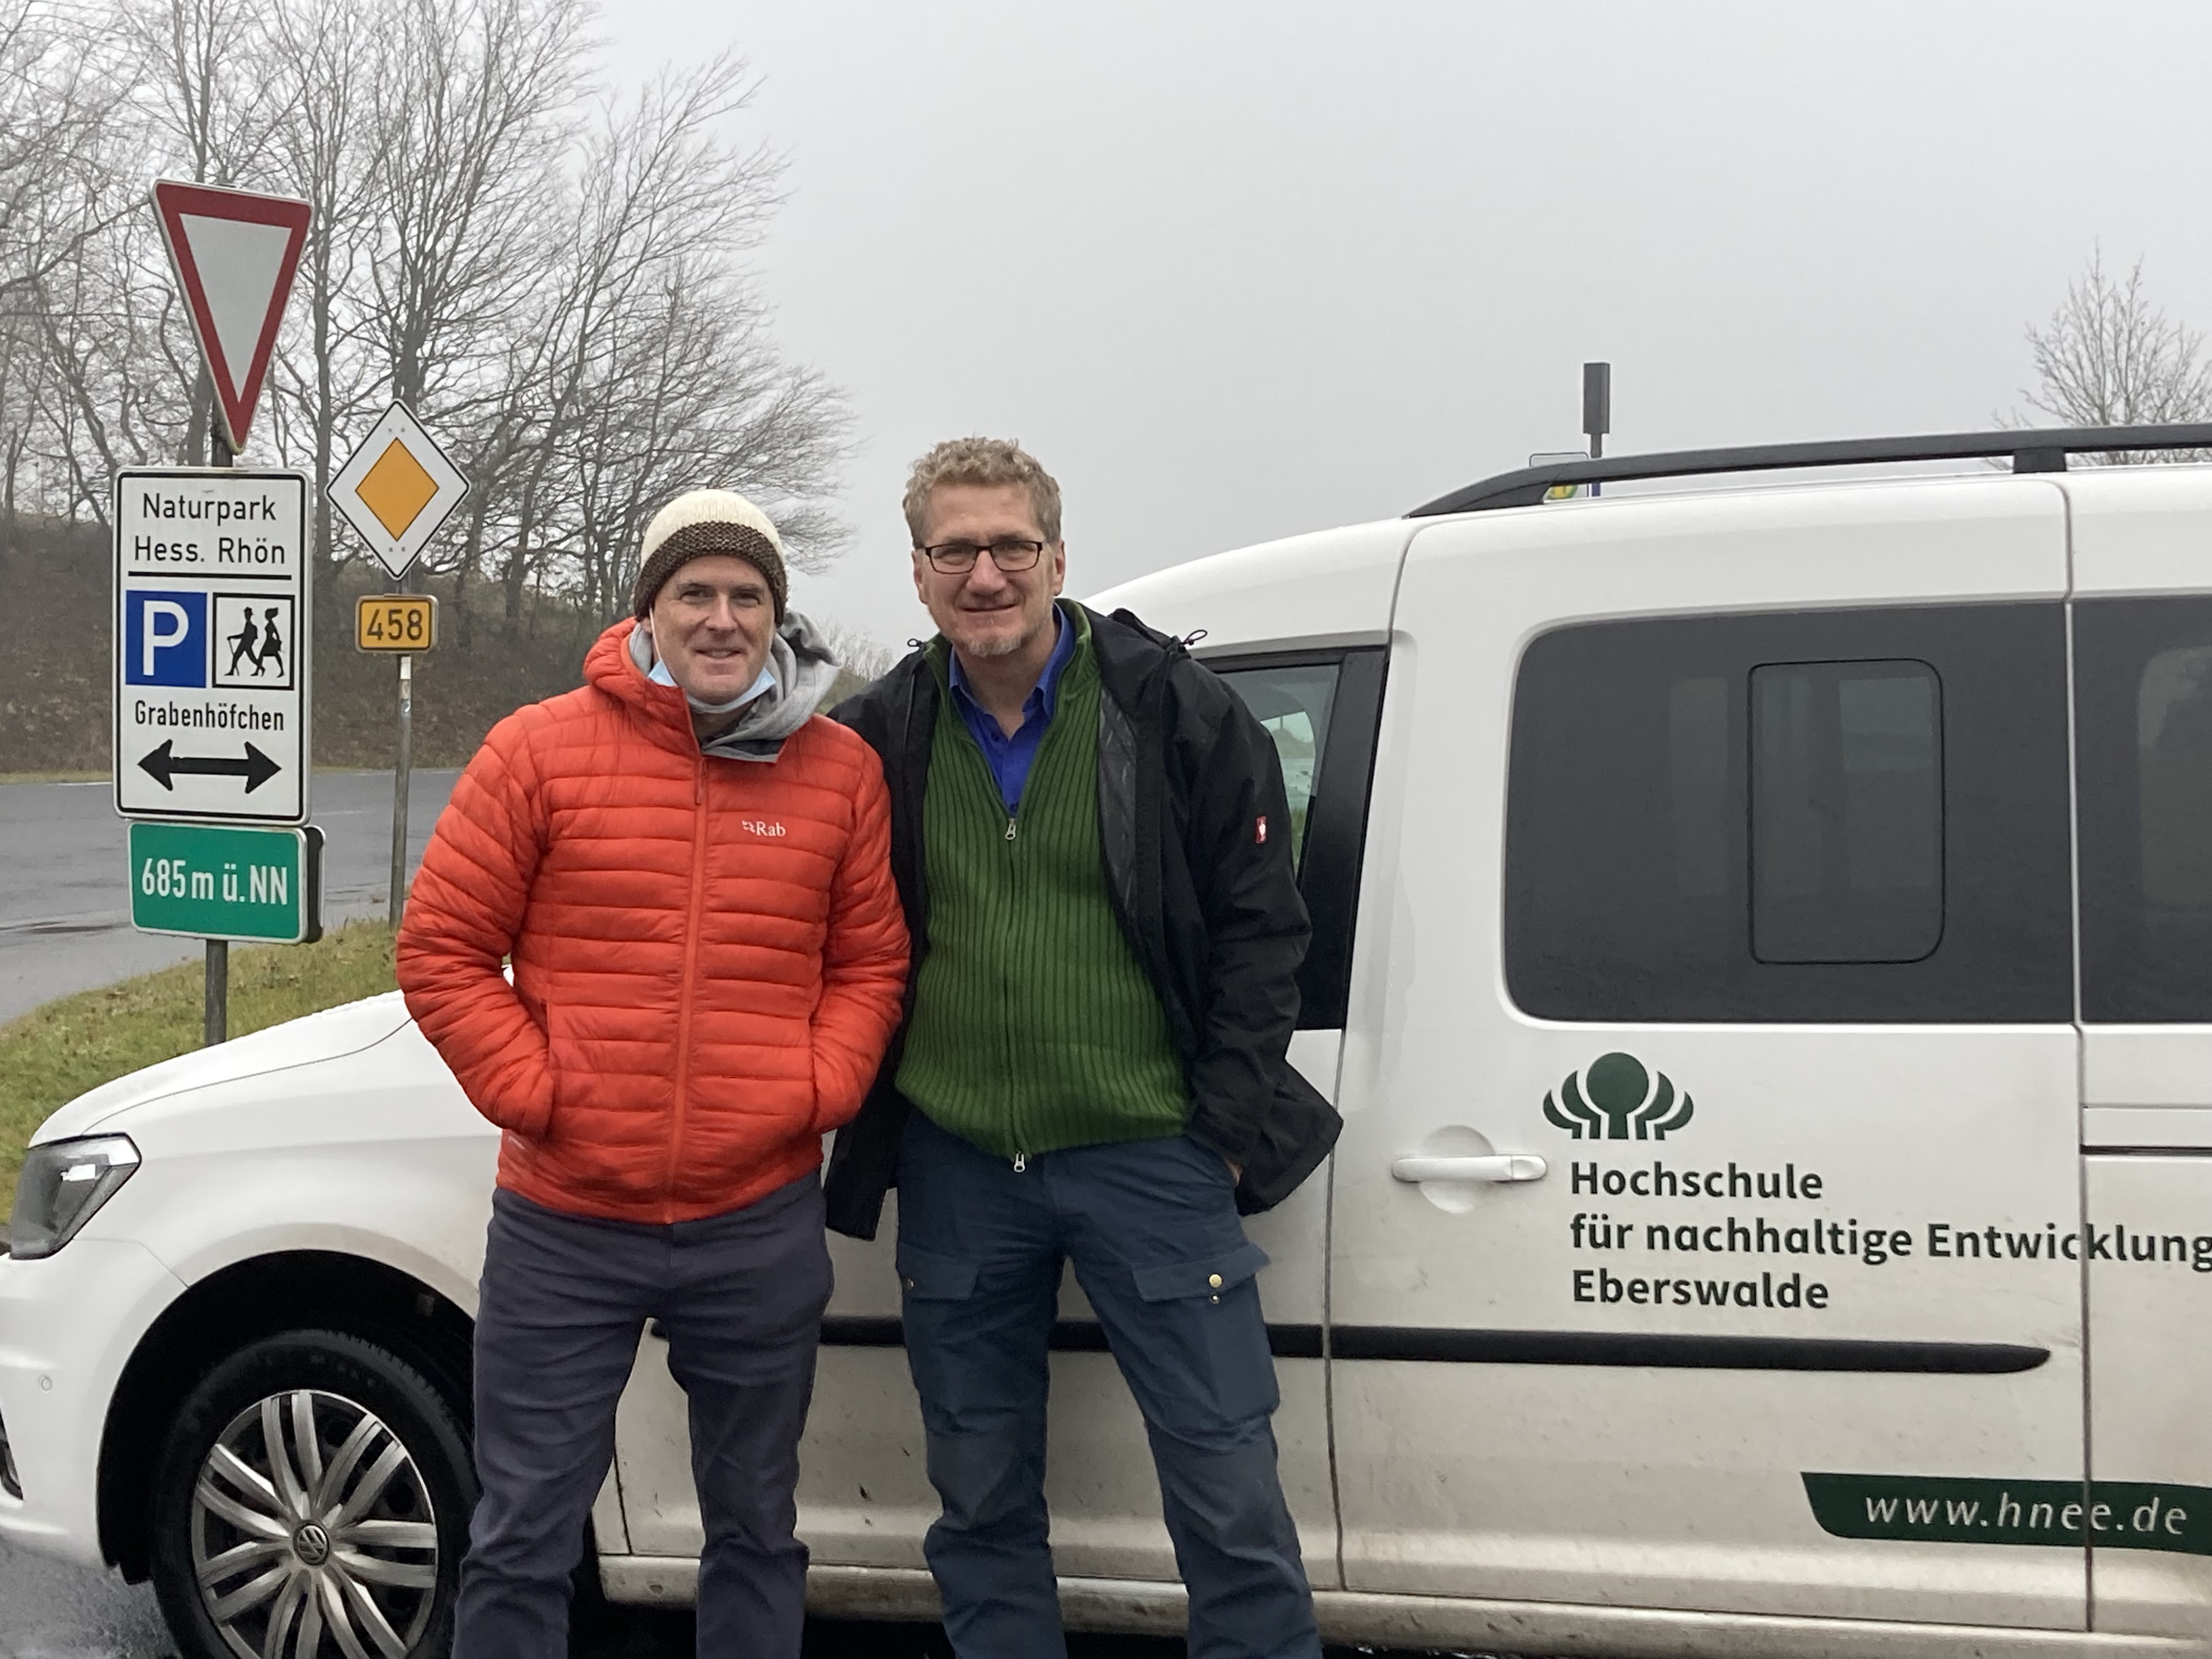 In this picture, Jim Robson and Uli Gräbener pause on a tour through the Rhön Biosphere Reserve.